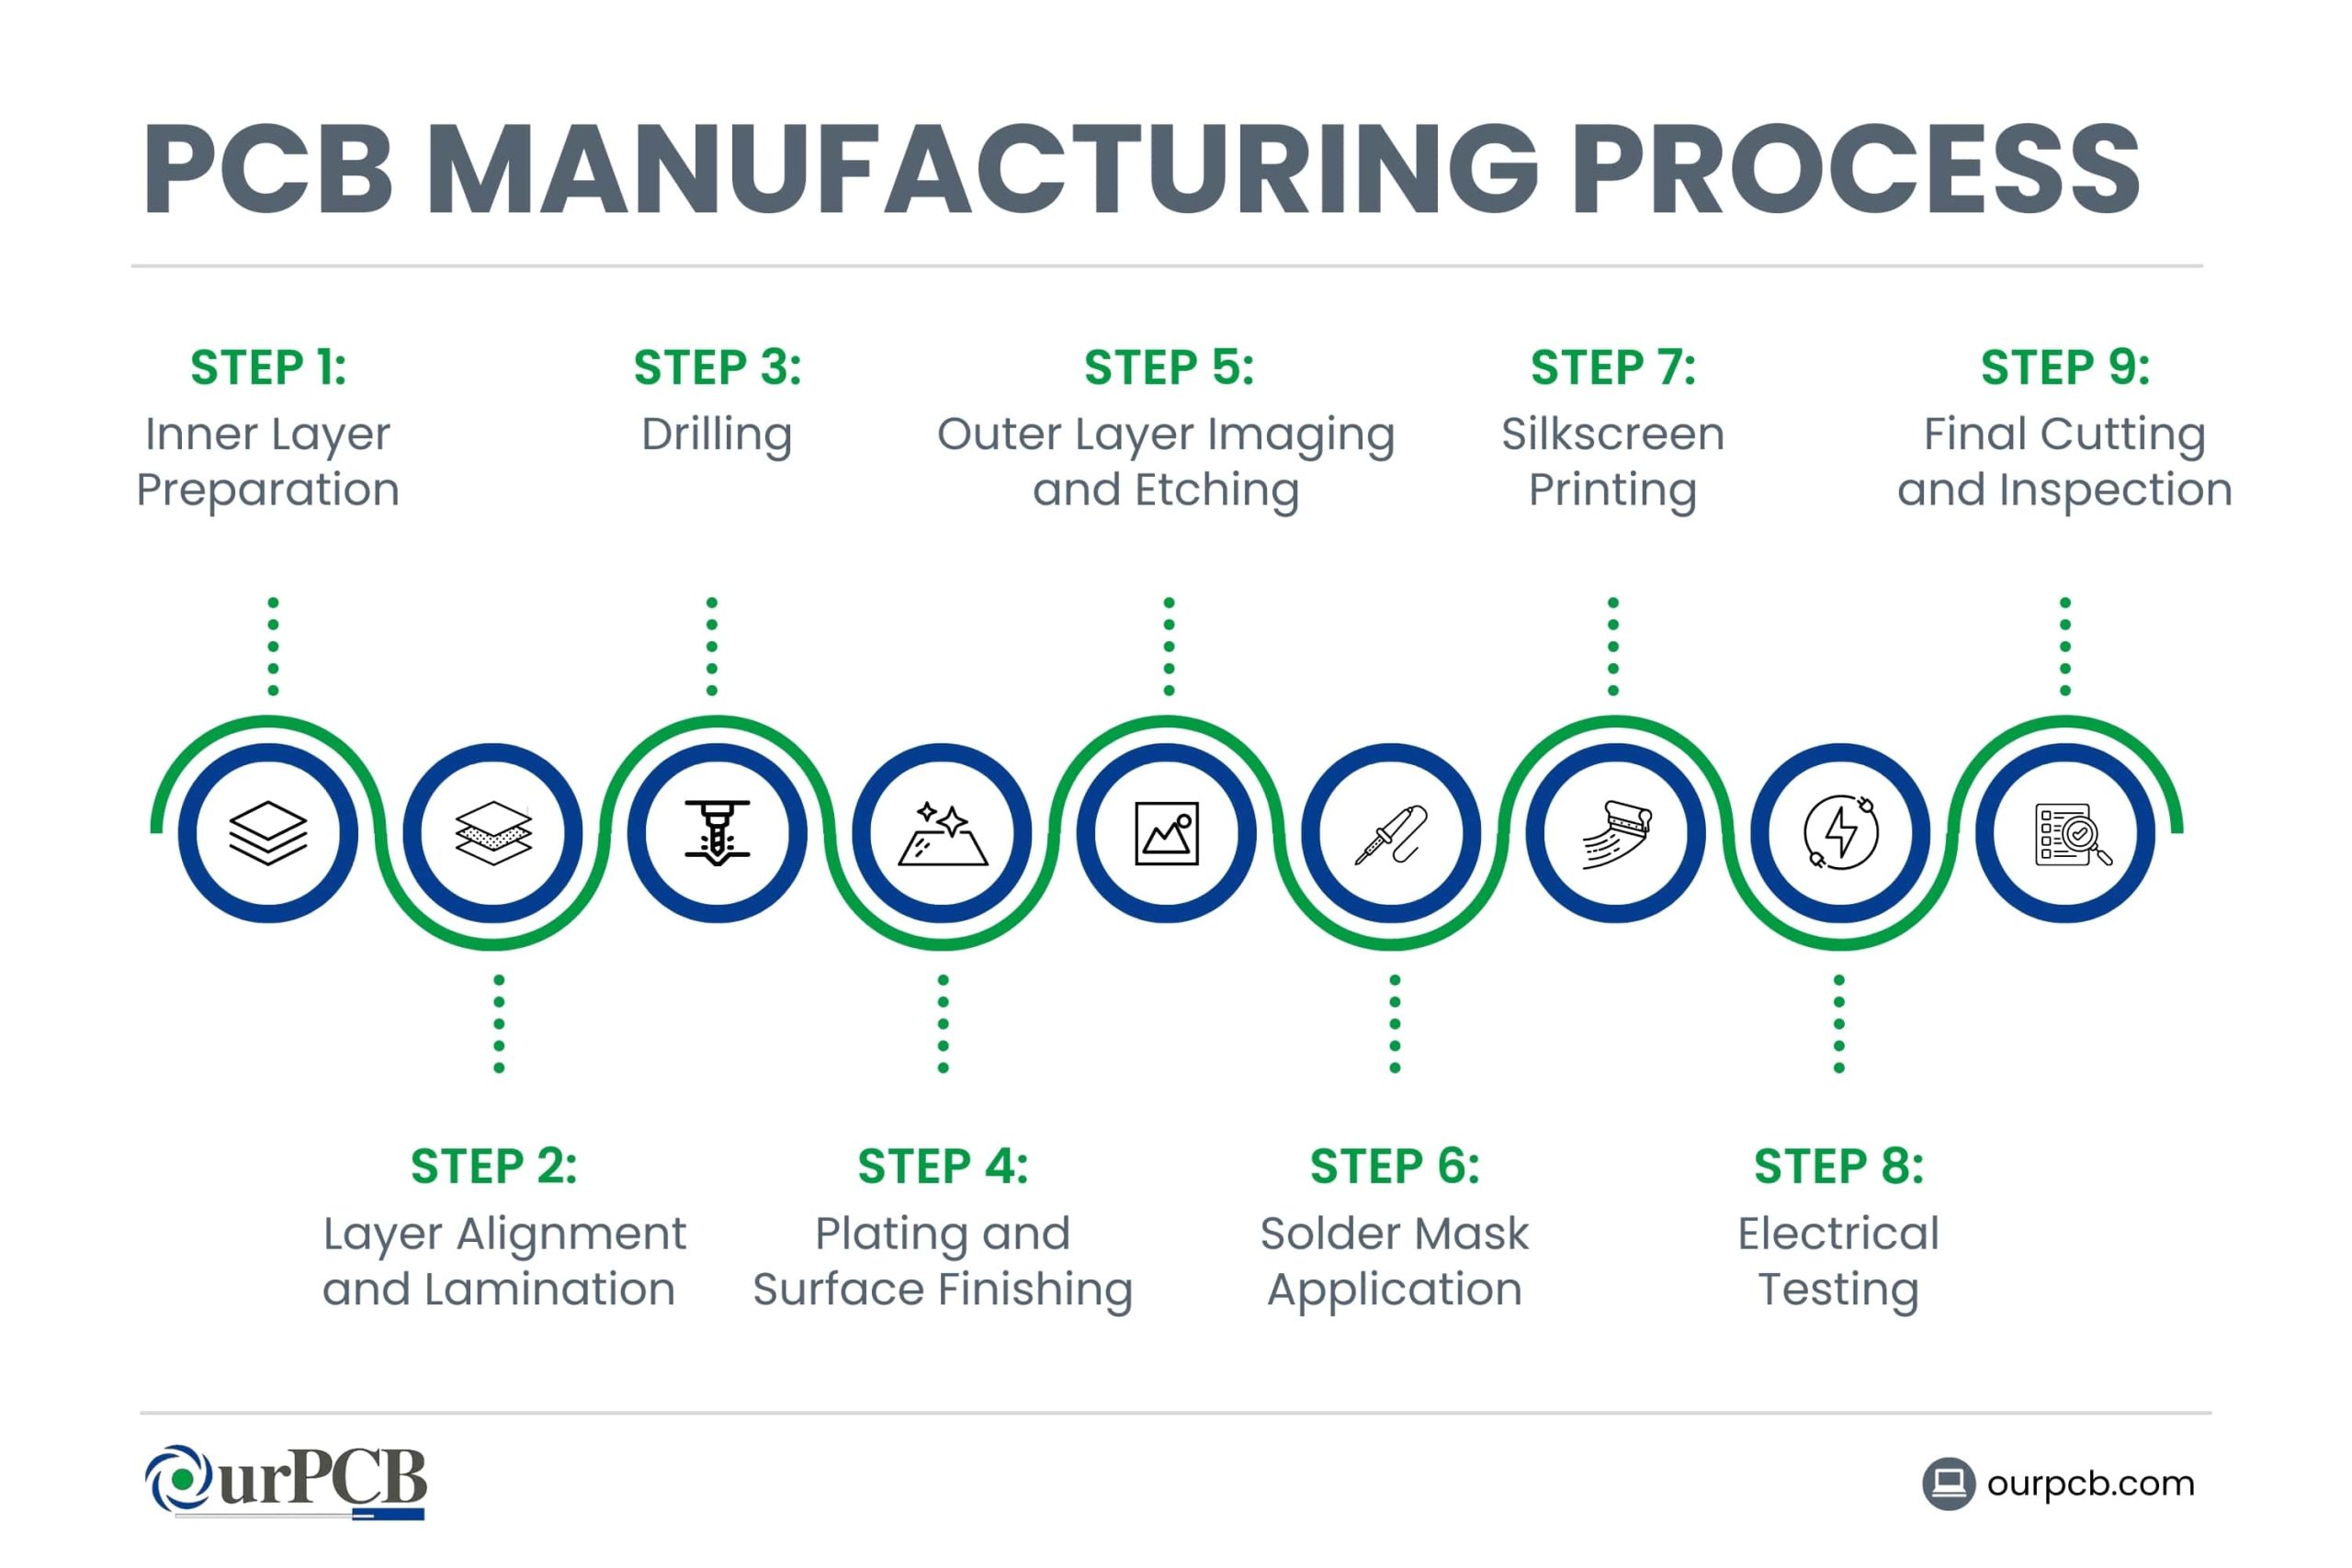 What is the PCB Manufacturing Process?